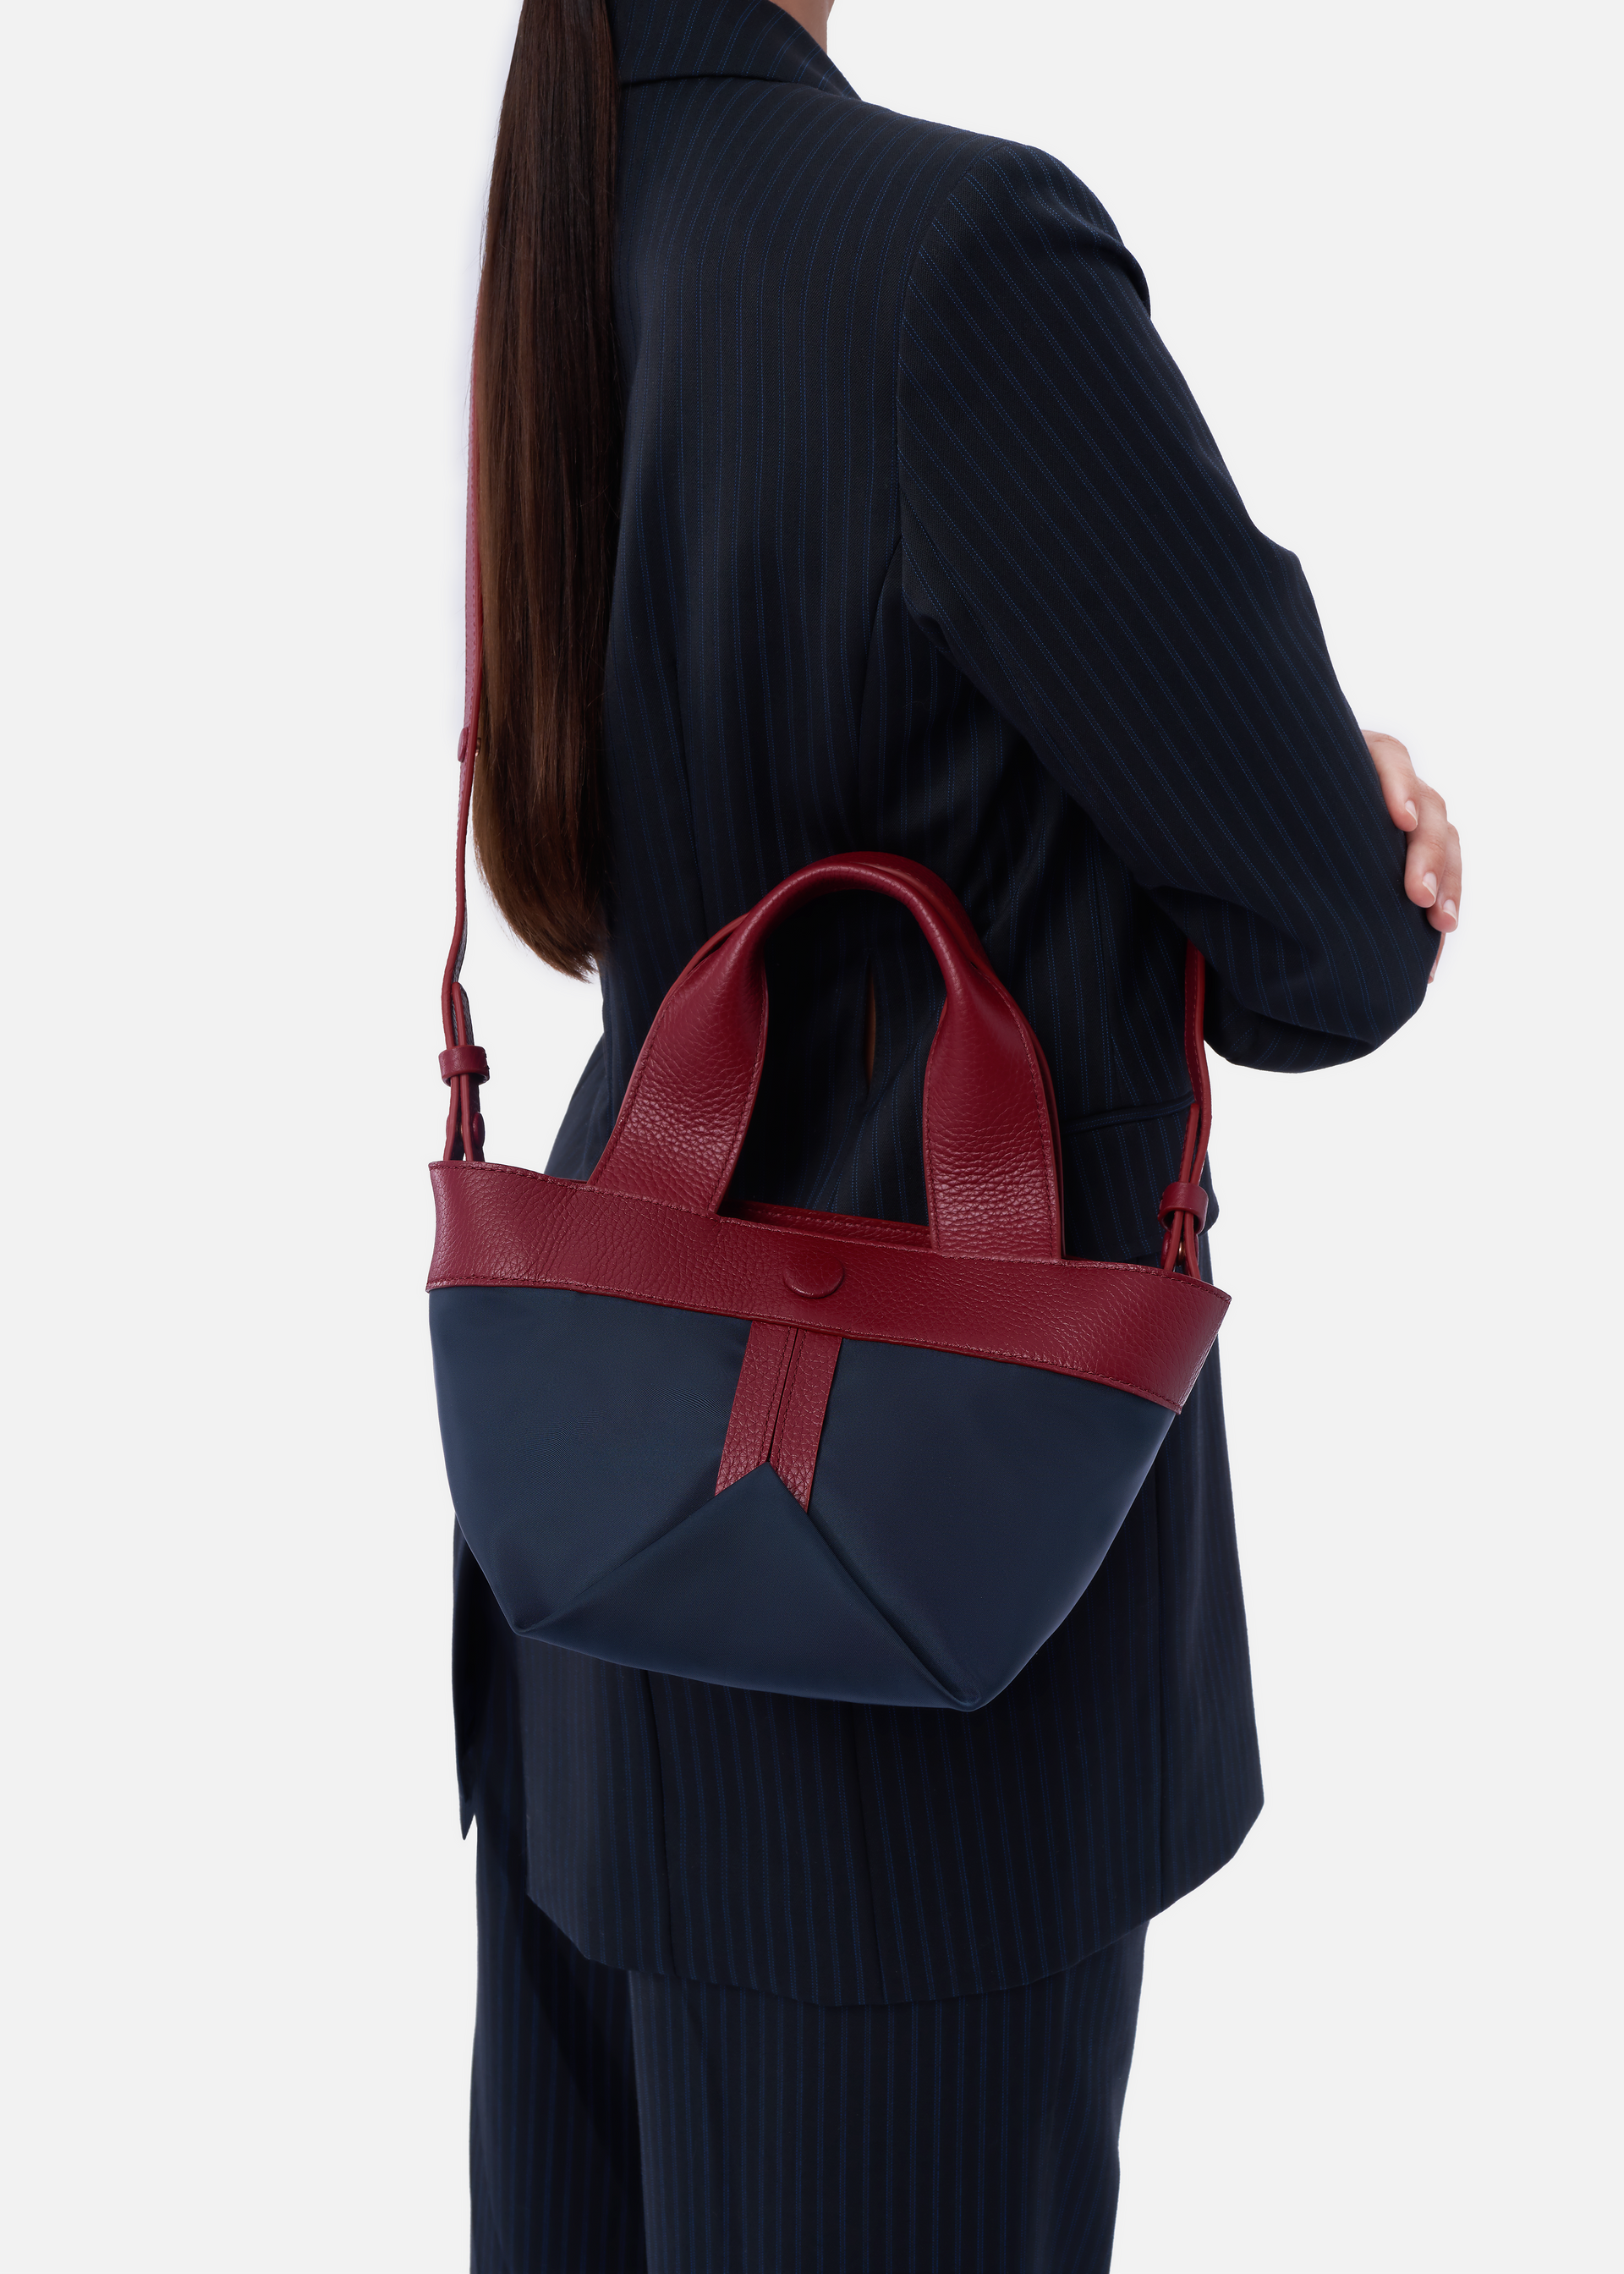 Gusset large nylon tote with pebble leather trim in navy